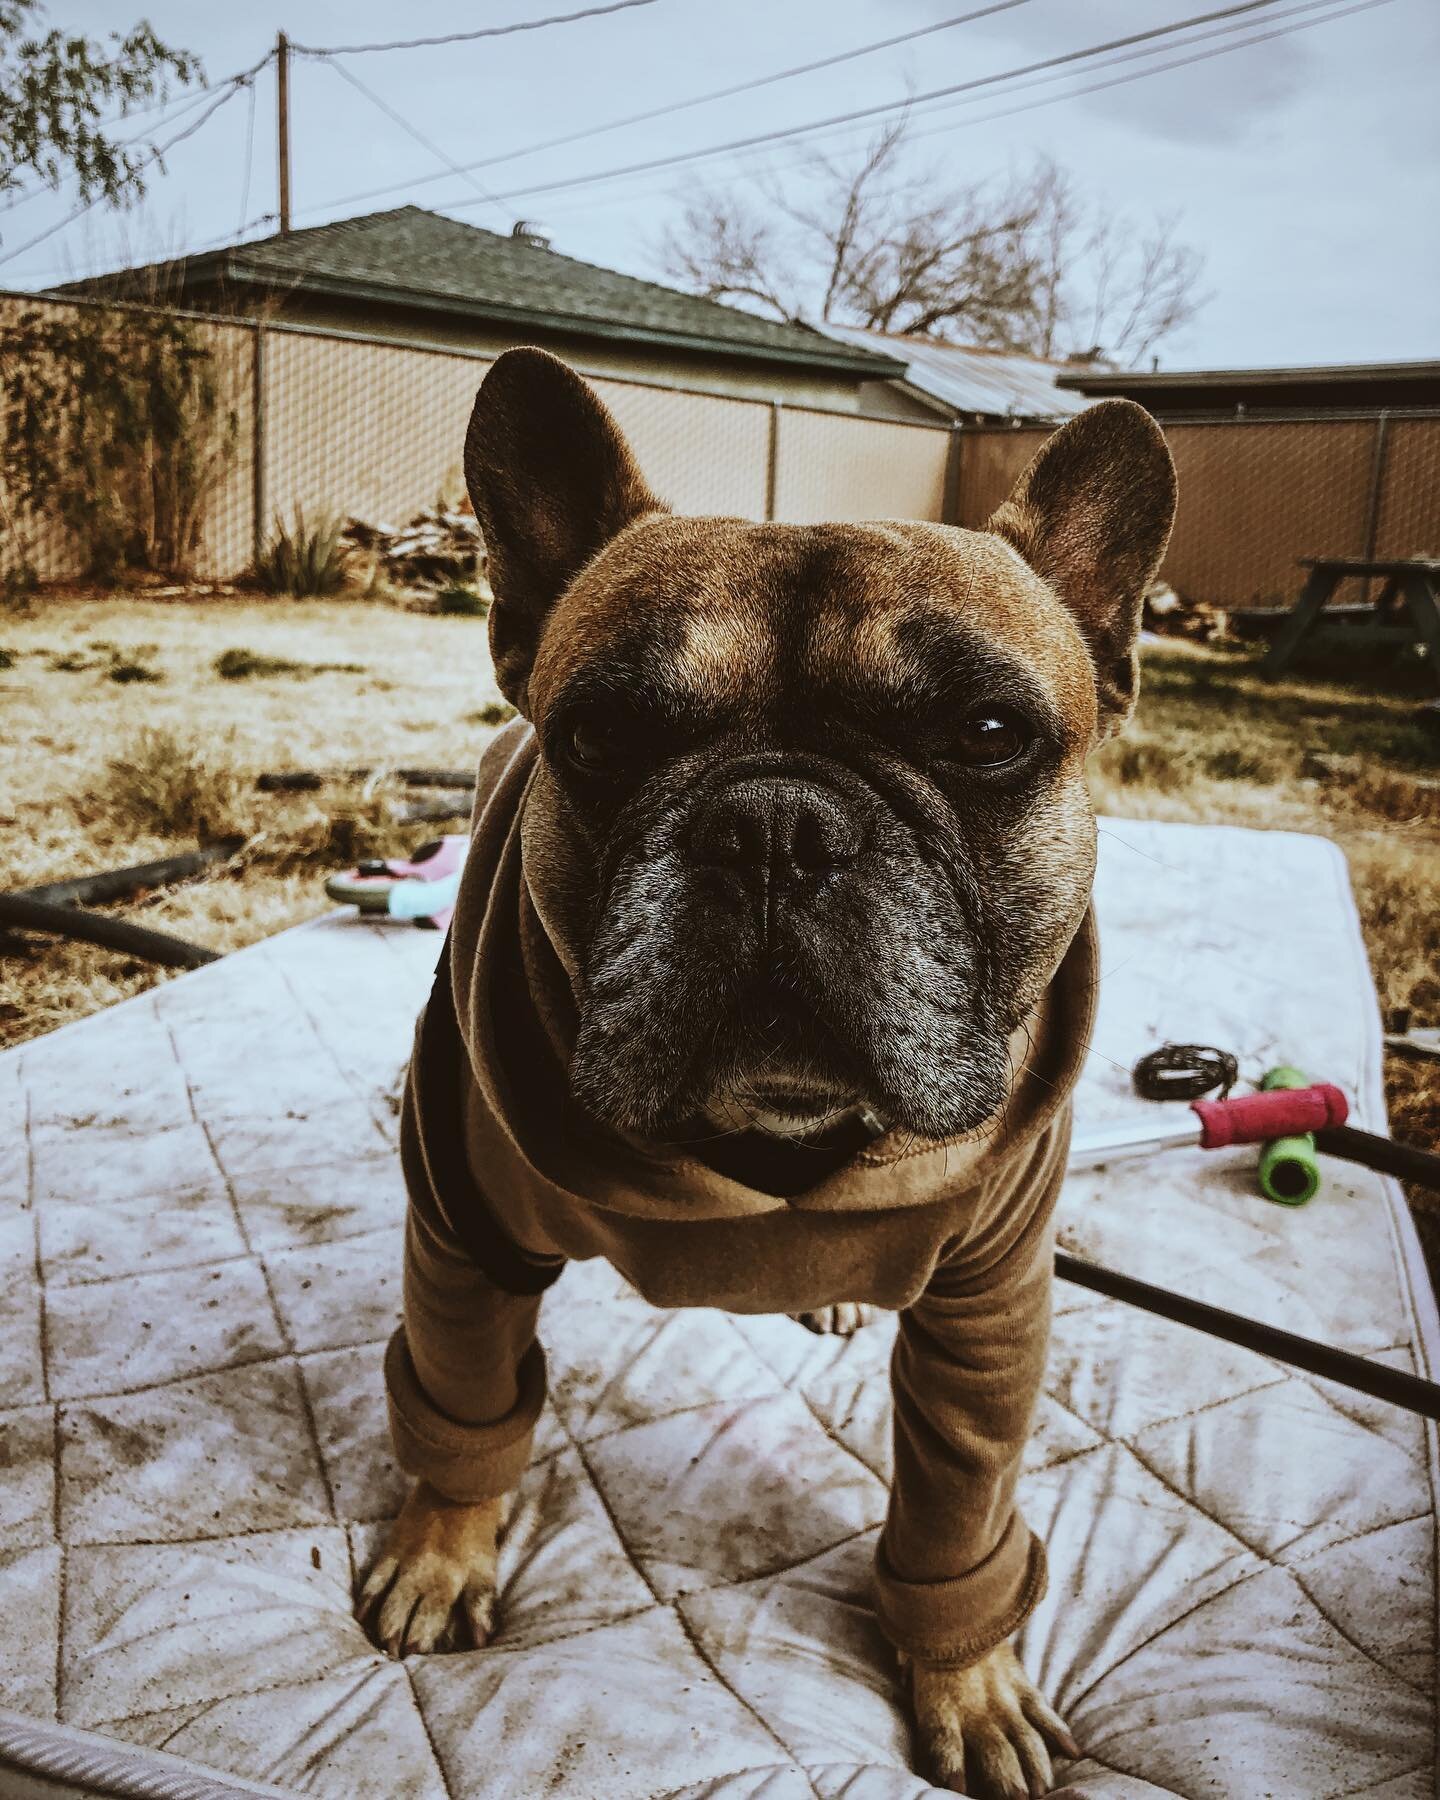 Meet Larry&mdash;today&rsquo;s home rehab supervisor. Needless to say, this Barstow property was ruff when we started. With Larry&rsquo;s guidance, this place will be beautiful and ready to hit the market in no time.